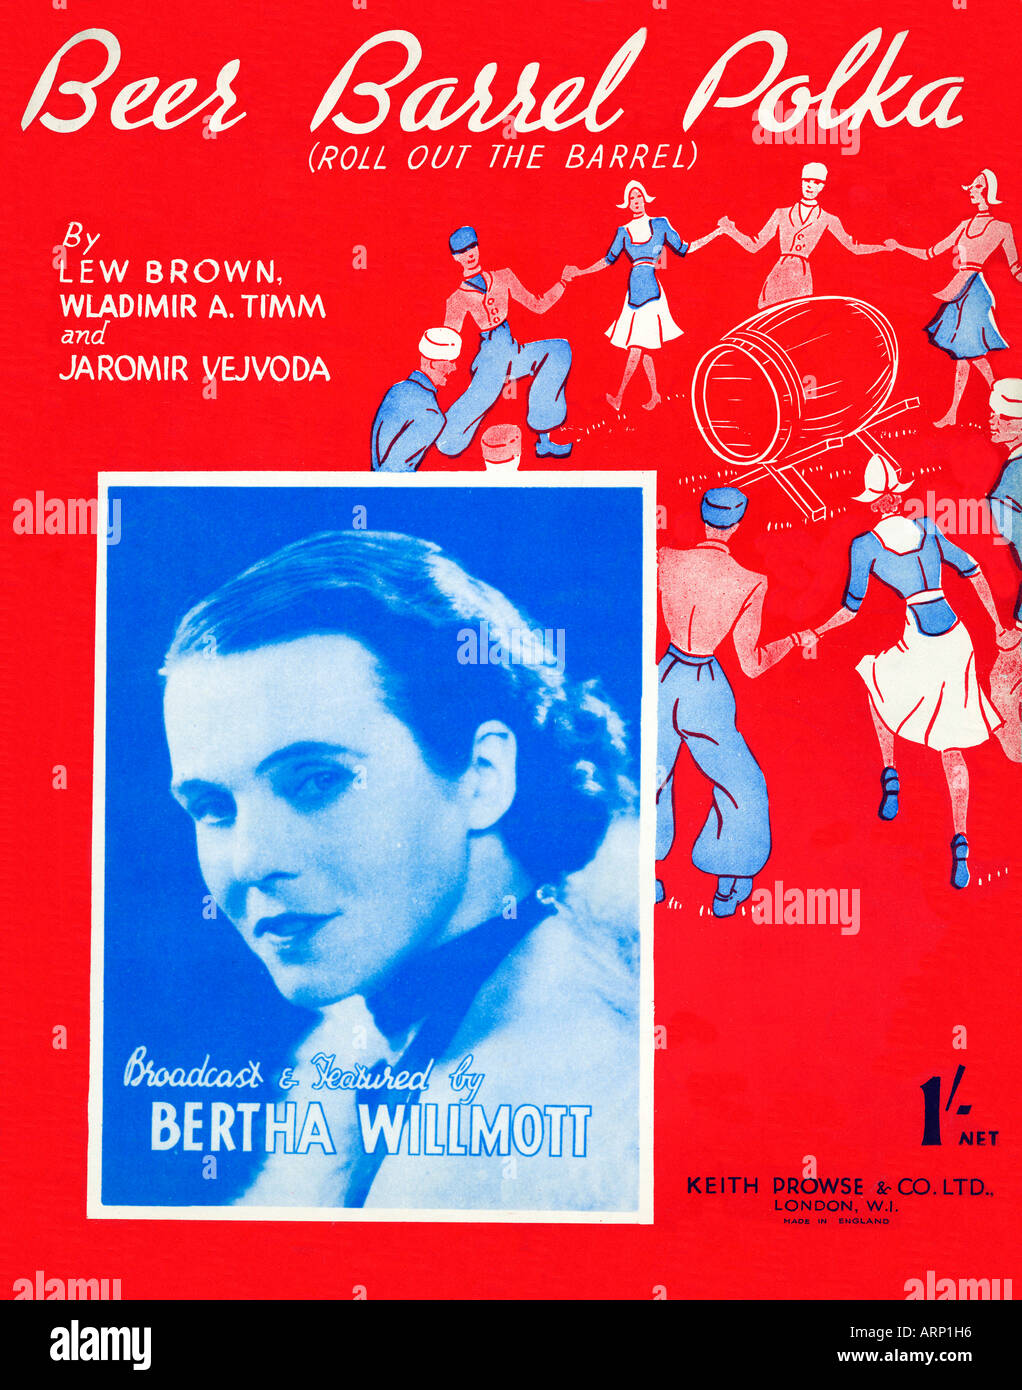 Beer Barrel Polka 1934 music sheet cover for the famous drinking song Roll out the Barrel sung by Berta Willmott Stock Photo